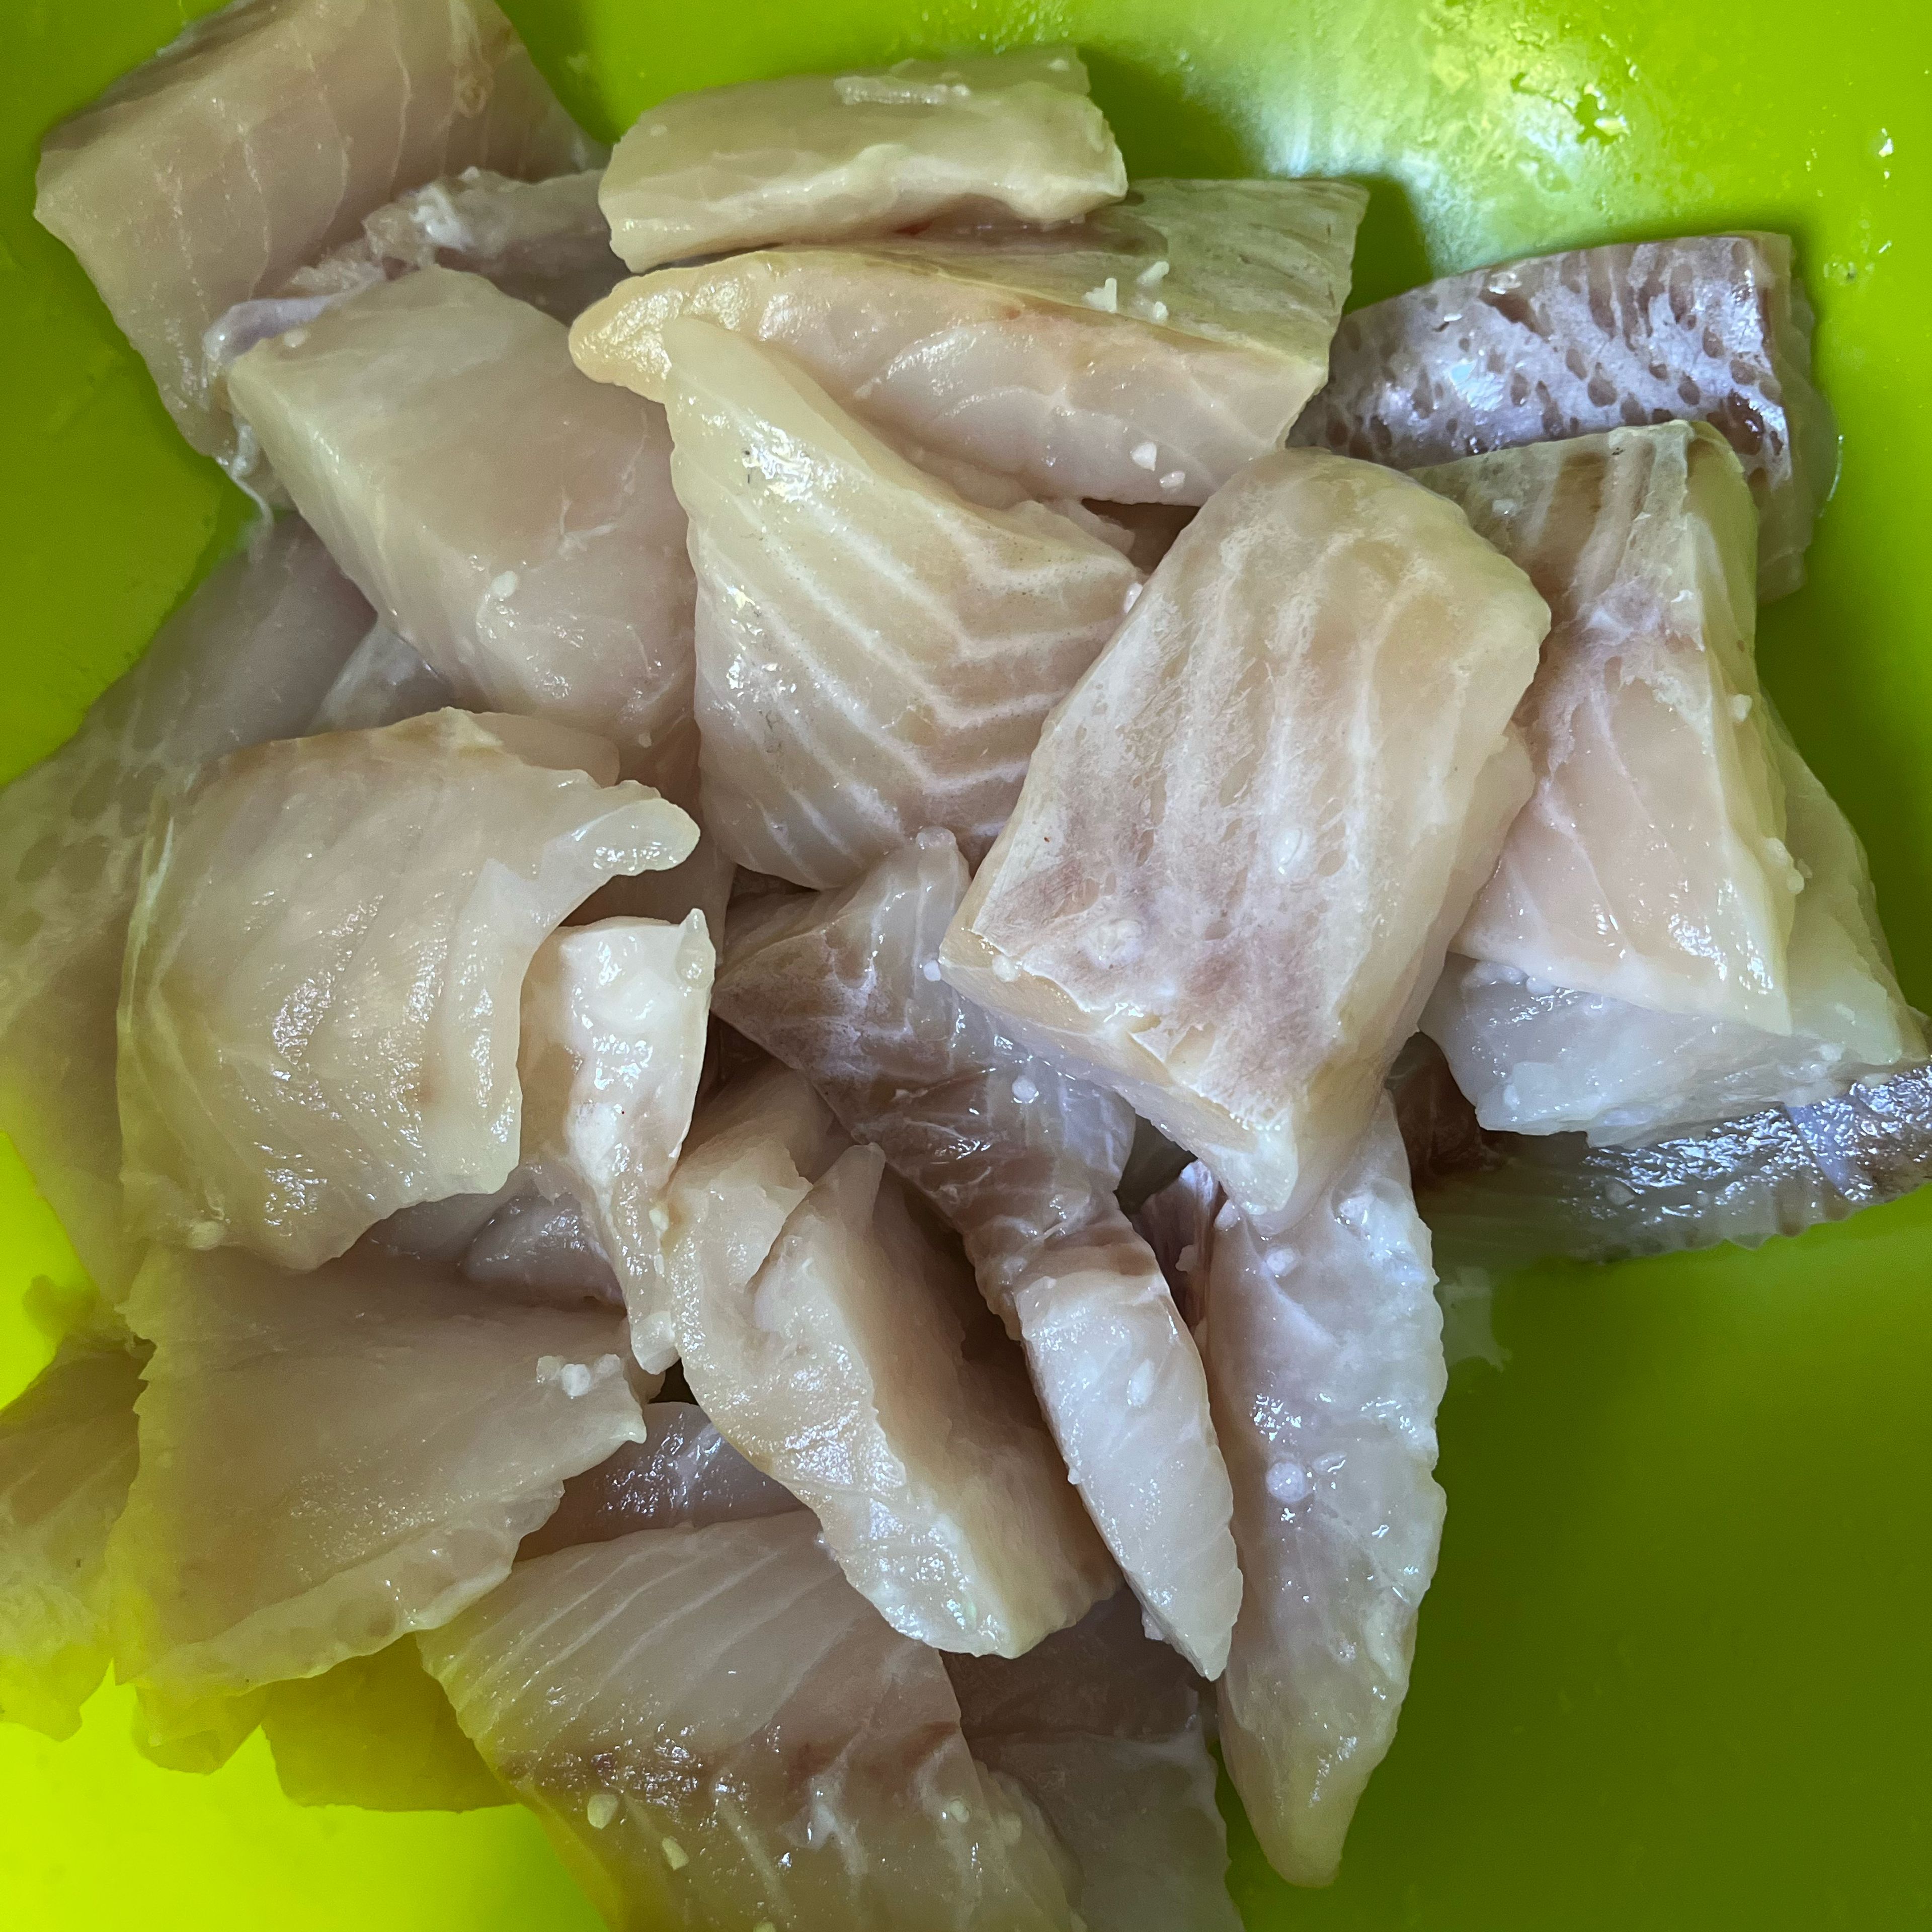 Cut fish into pieces and marinade with salt and lime juice for 30min.